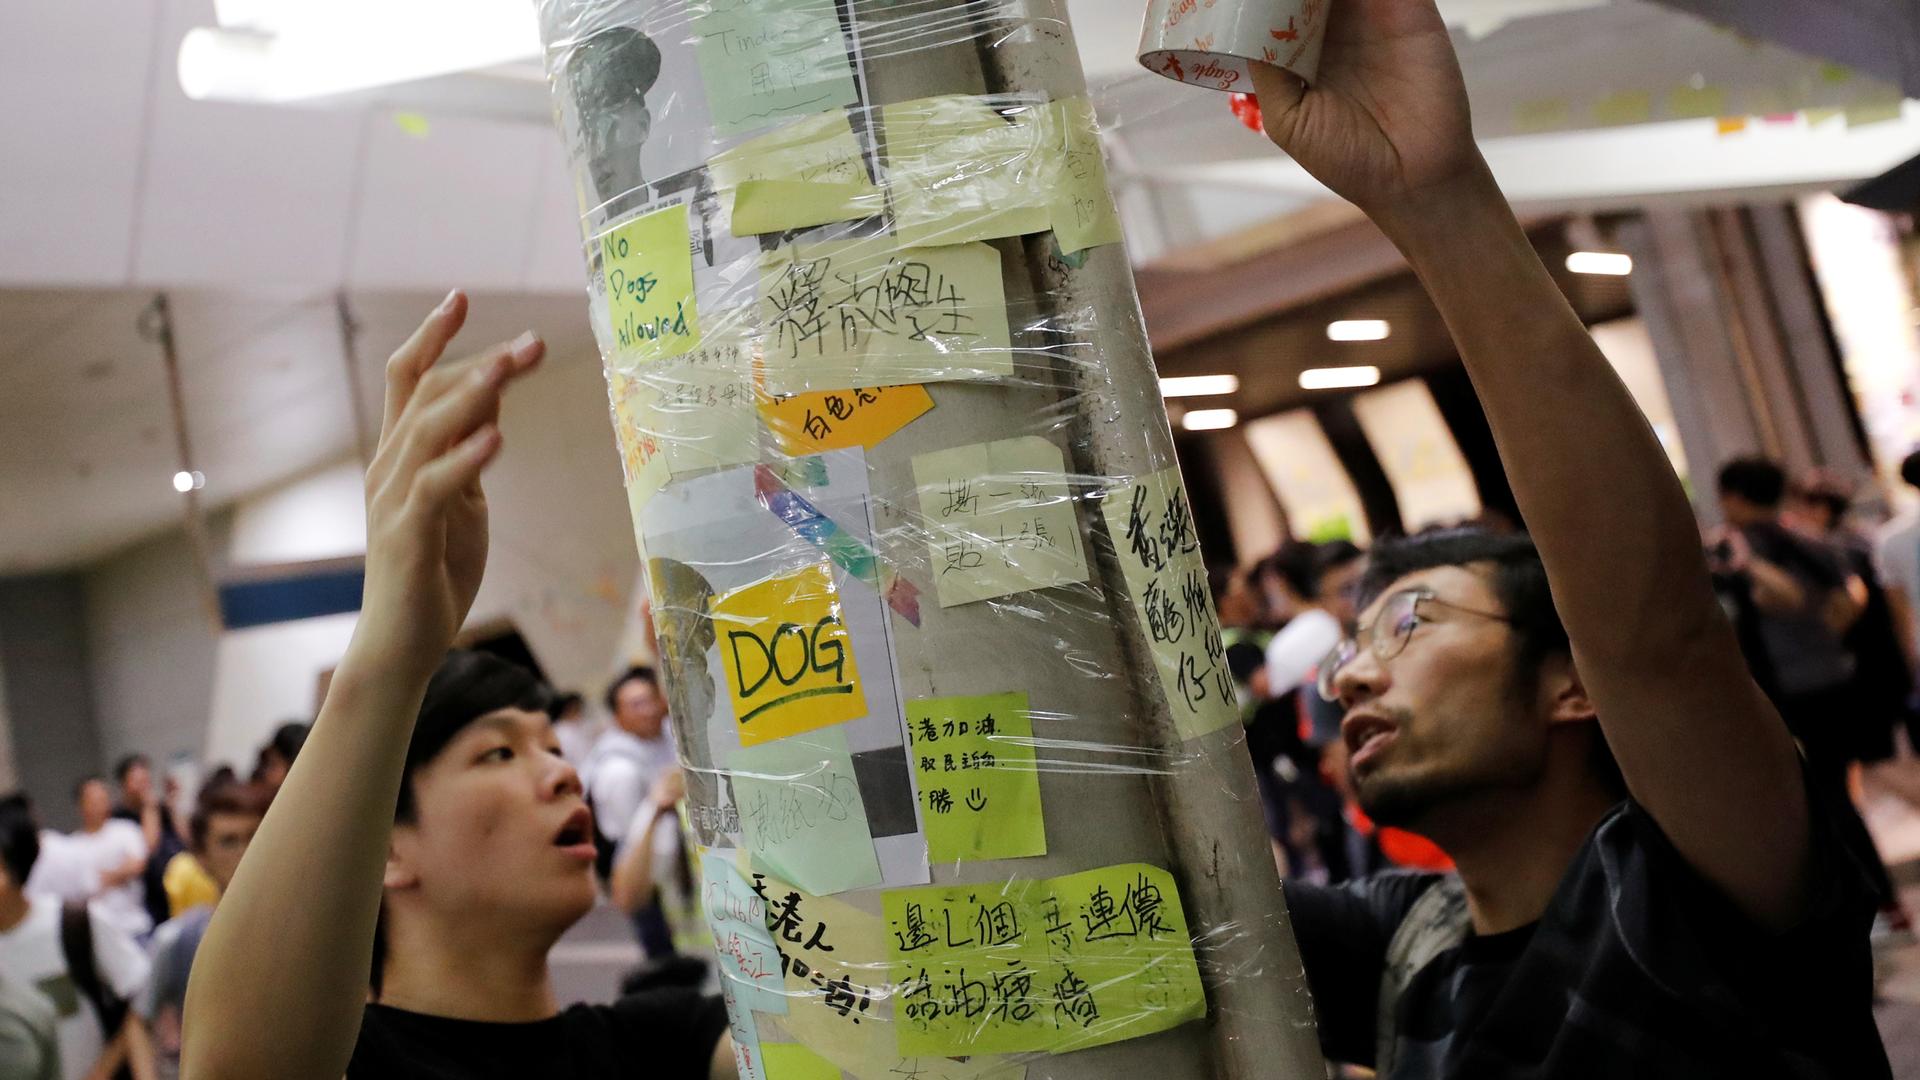 Two people wrap tape around a column covered in post-it notes to protect the "Lennon Wall"